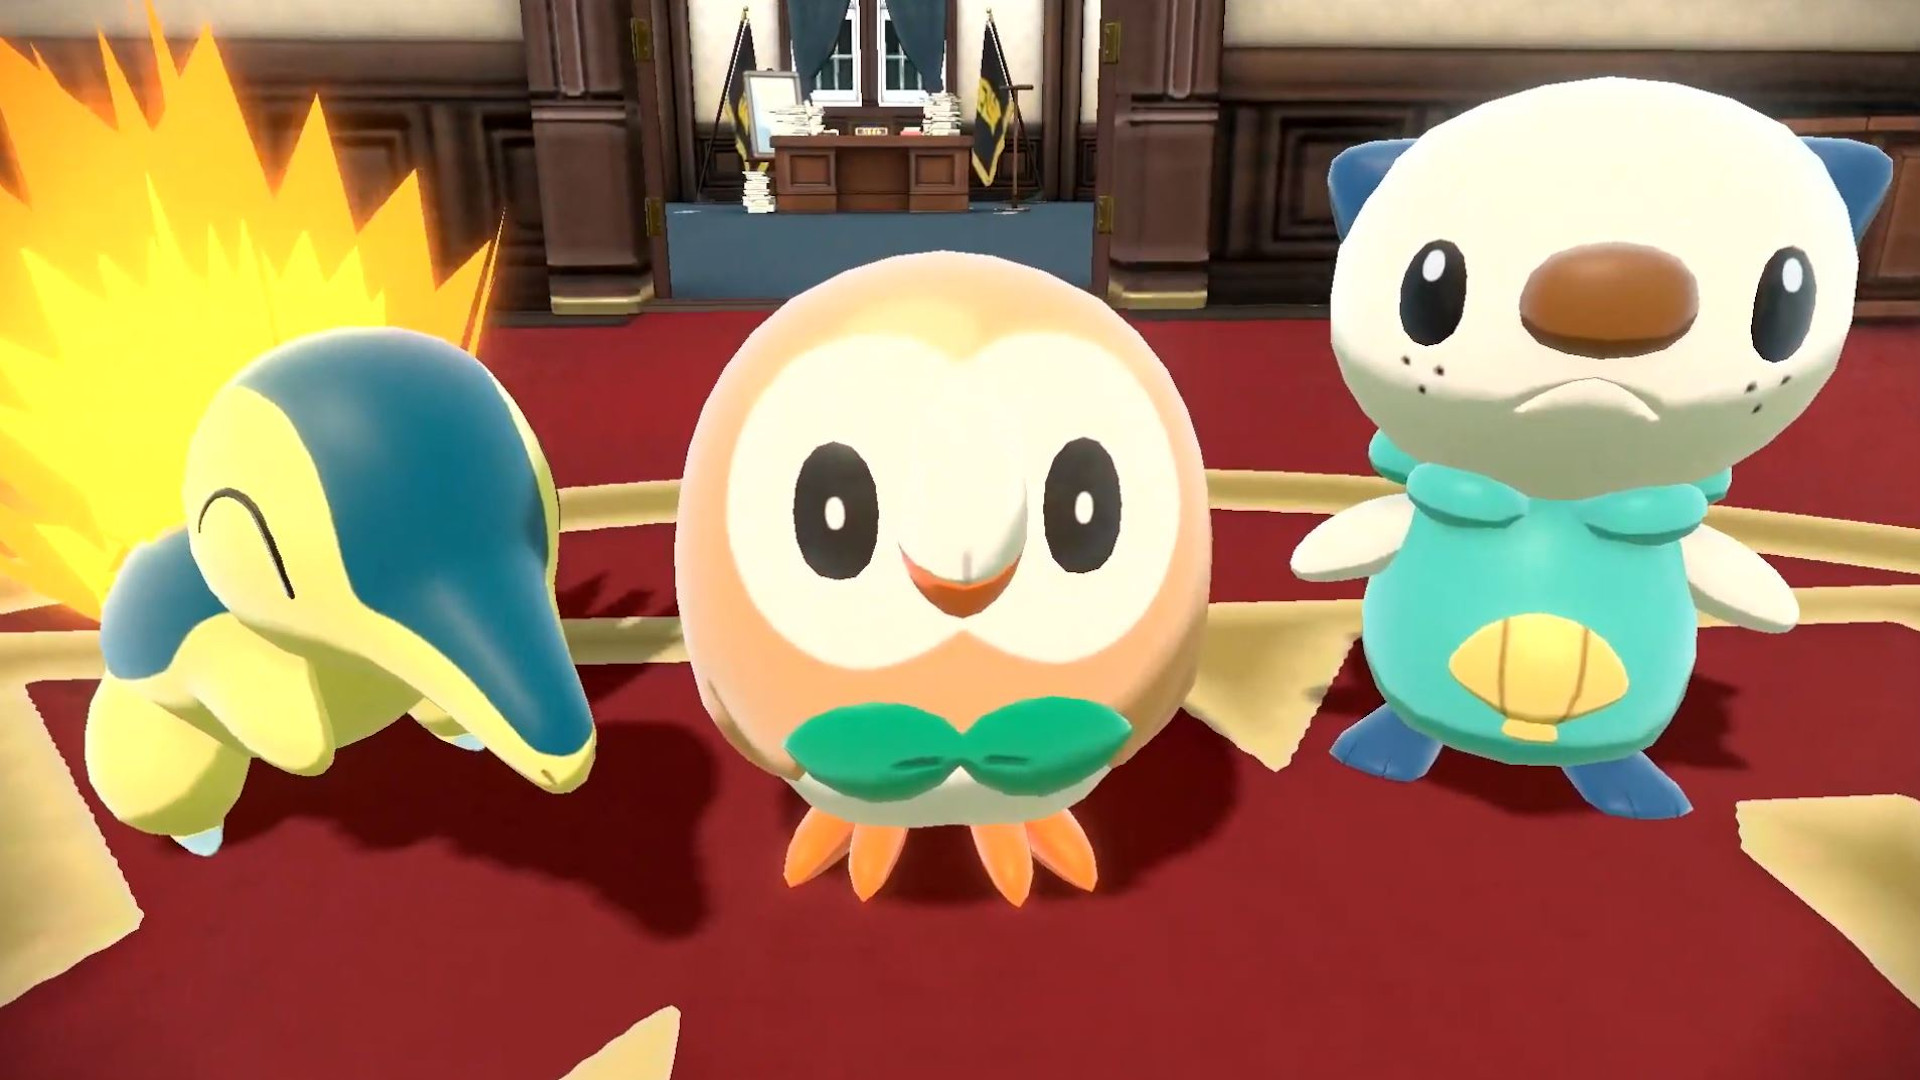 Pokémon Legends Arceus: Cyndaquil, Rowlet, and Oshawott standing next to each other inside an administrative-looking building with red carpet.